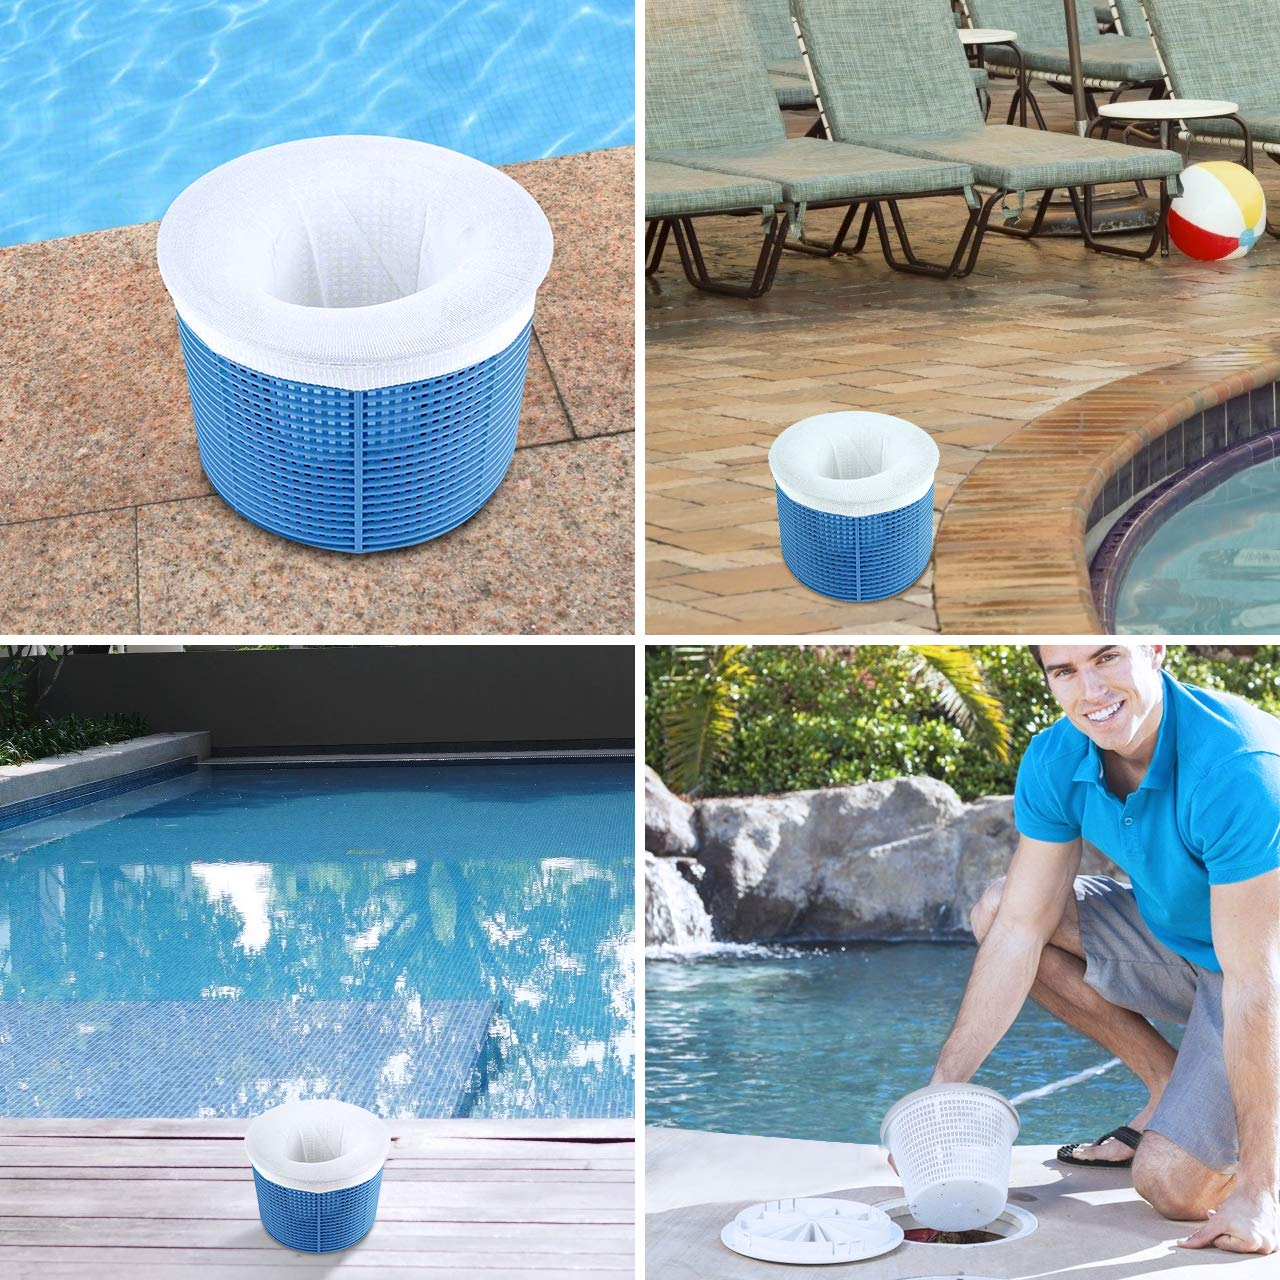 Hangarone 5PCS Pool Skimmer Socks Filters Baskets Skimmers Cleans Debris And Leaves For In-ground Above Ground Pools,20x10CM No Basket